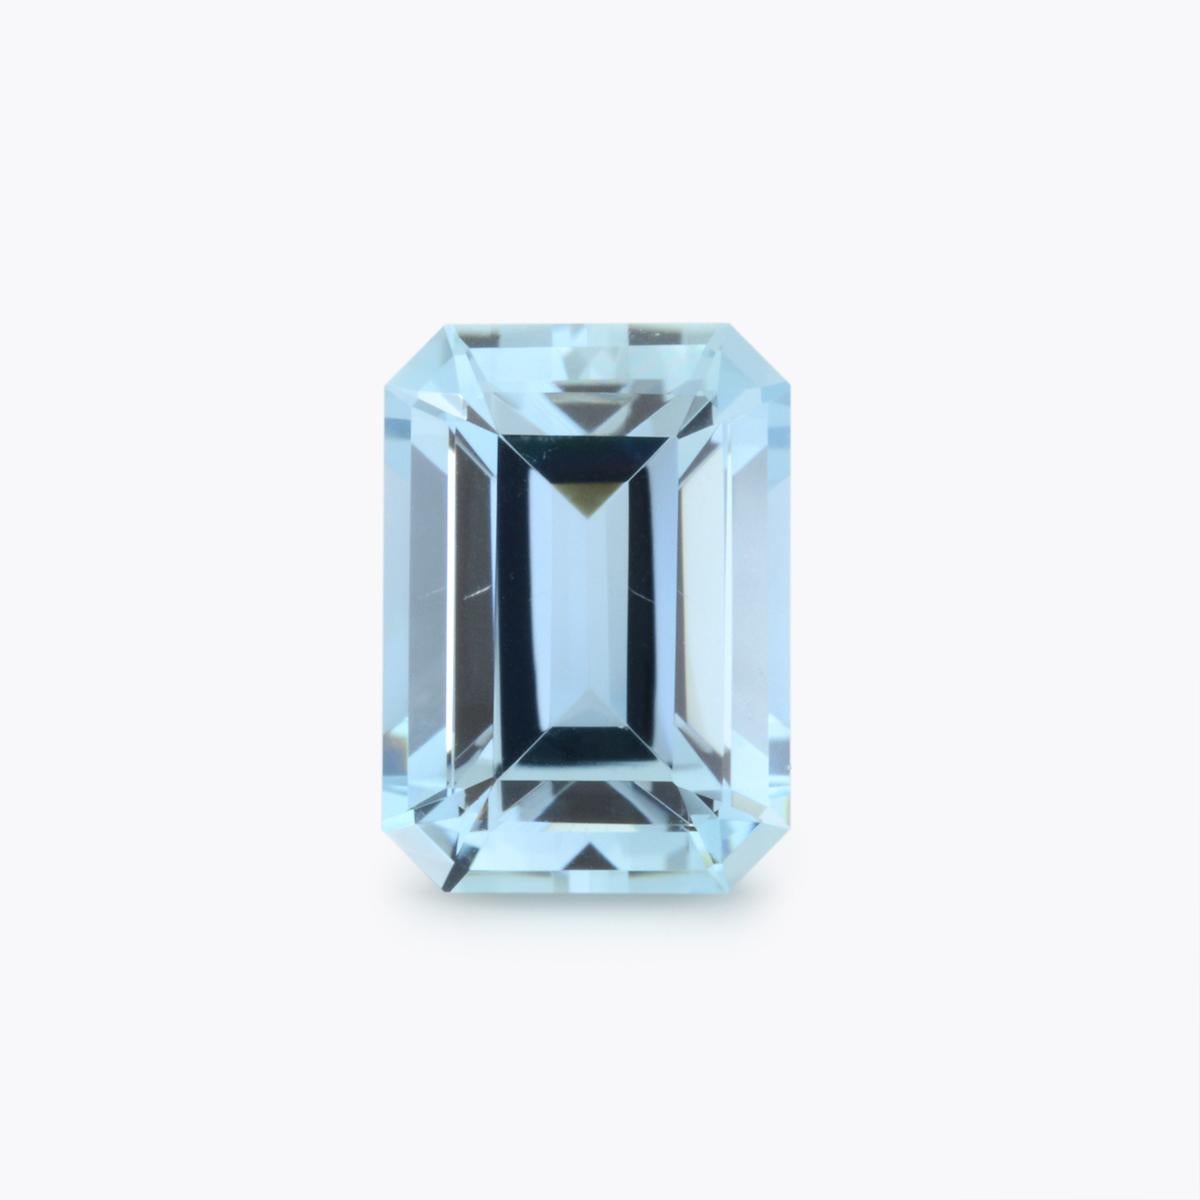 1.85 Carat Aquamarine emerald-cut loose gemstone, offered unmounted to someone special.
Returns are accepted and paid by us within 7 days of delivery.
We offer supreme custom jewelry work upon request. Please contact us for more details.
For your